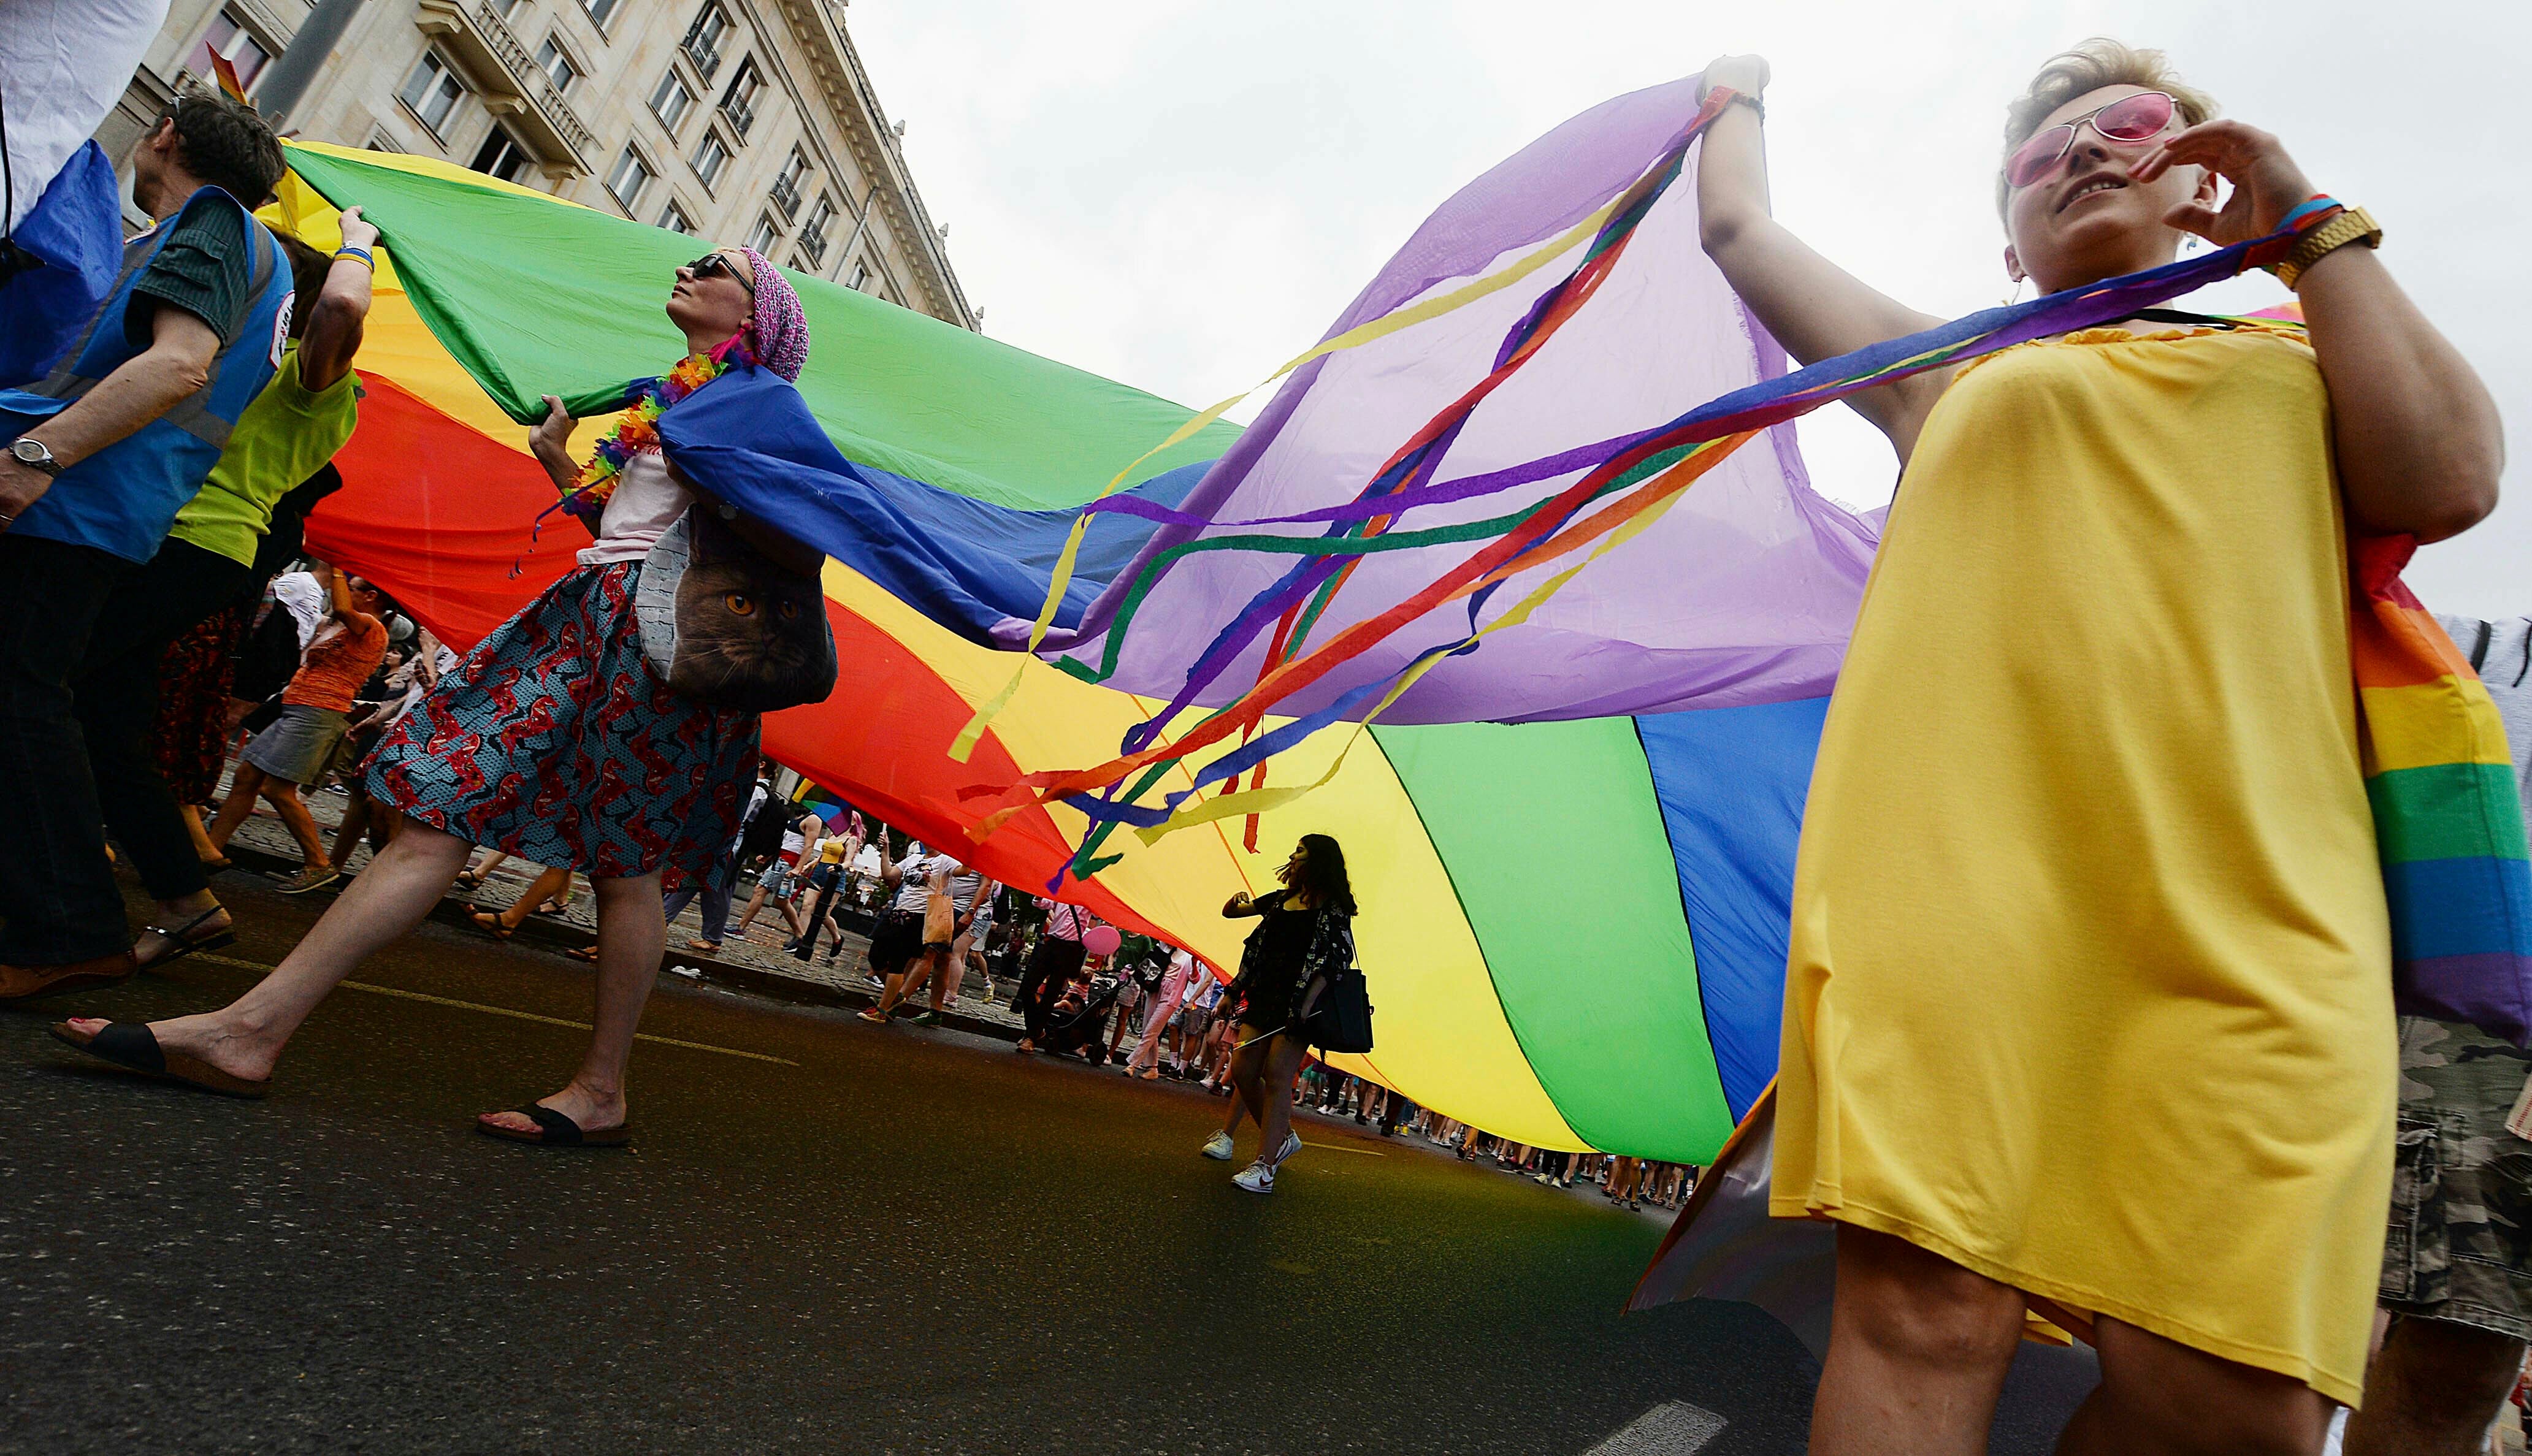 People take part in a gay pride parade in Warsaw, Poland, Saturday, June 8, 2019.